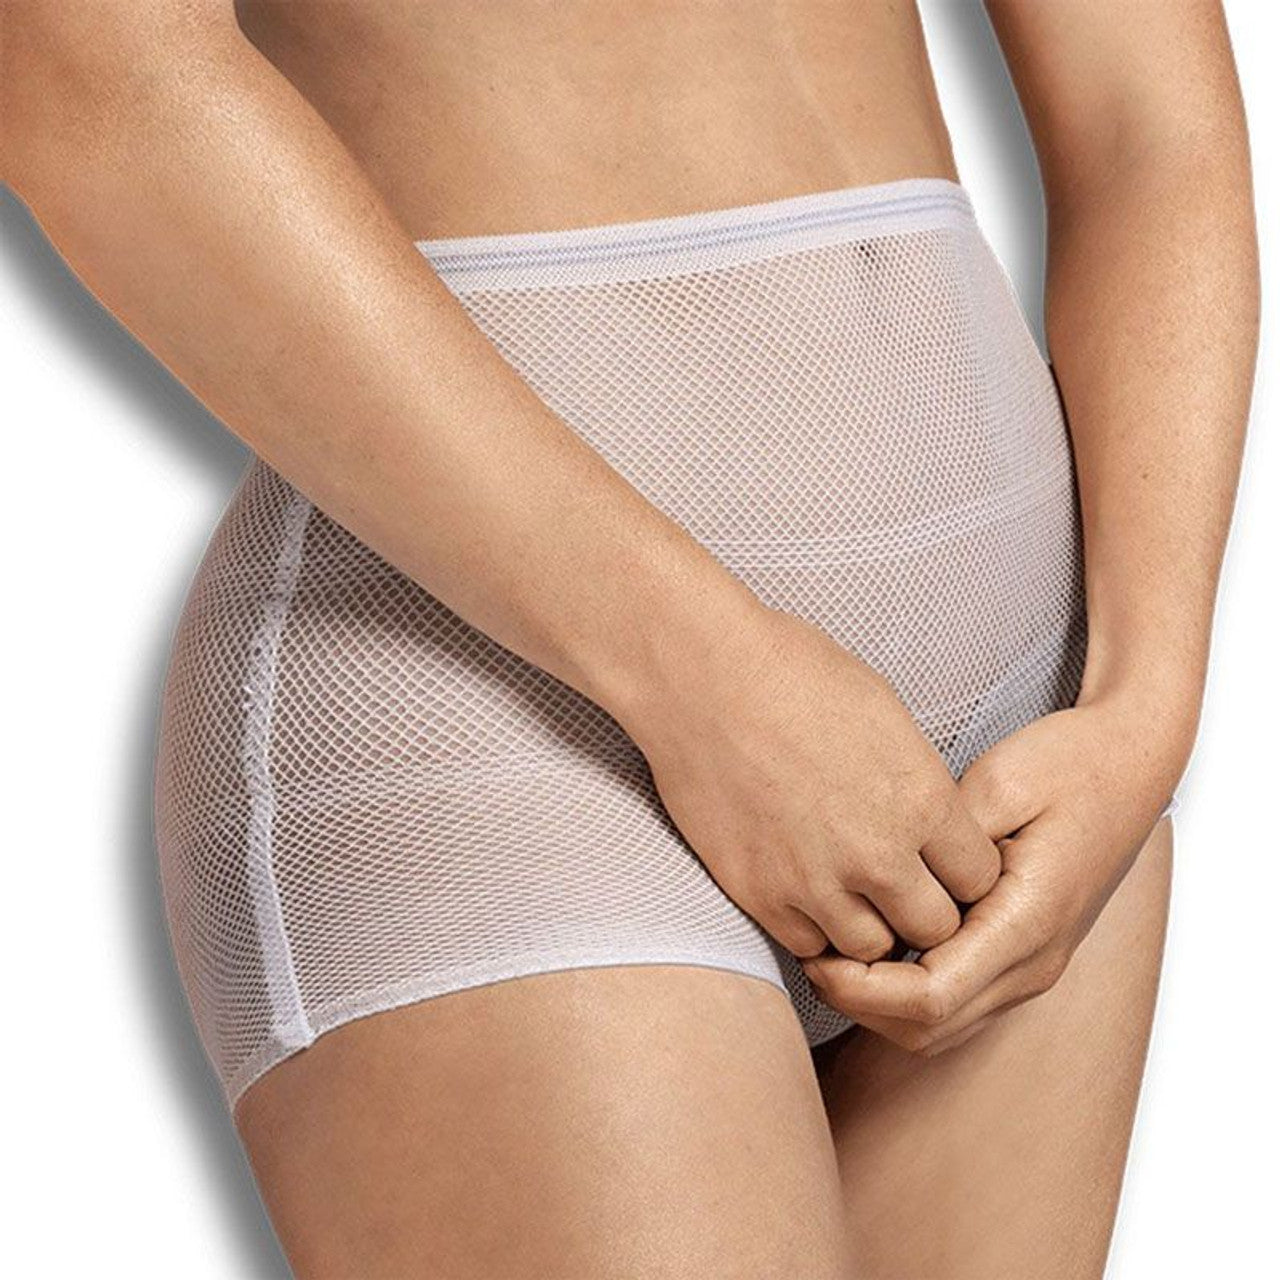 Carriwell - Hospital Panties - Pack of 4 (White)